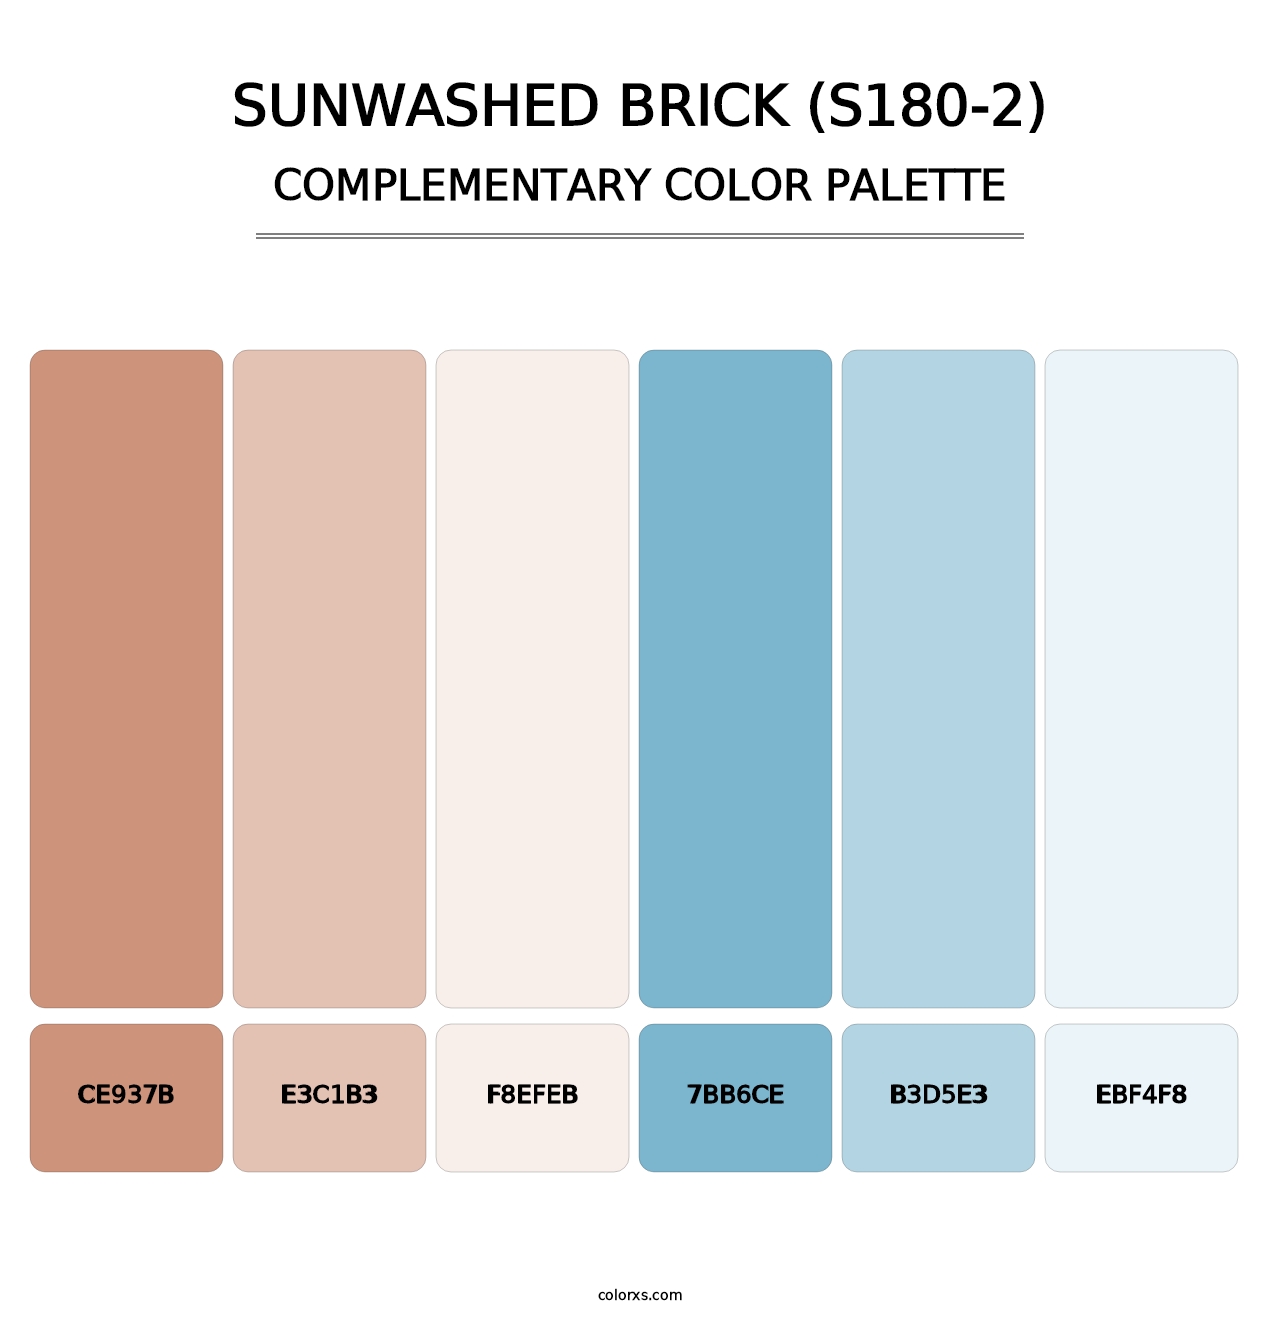 Sunwashed Brick (S180-2) - Complementary Color Palette